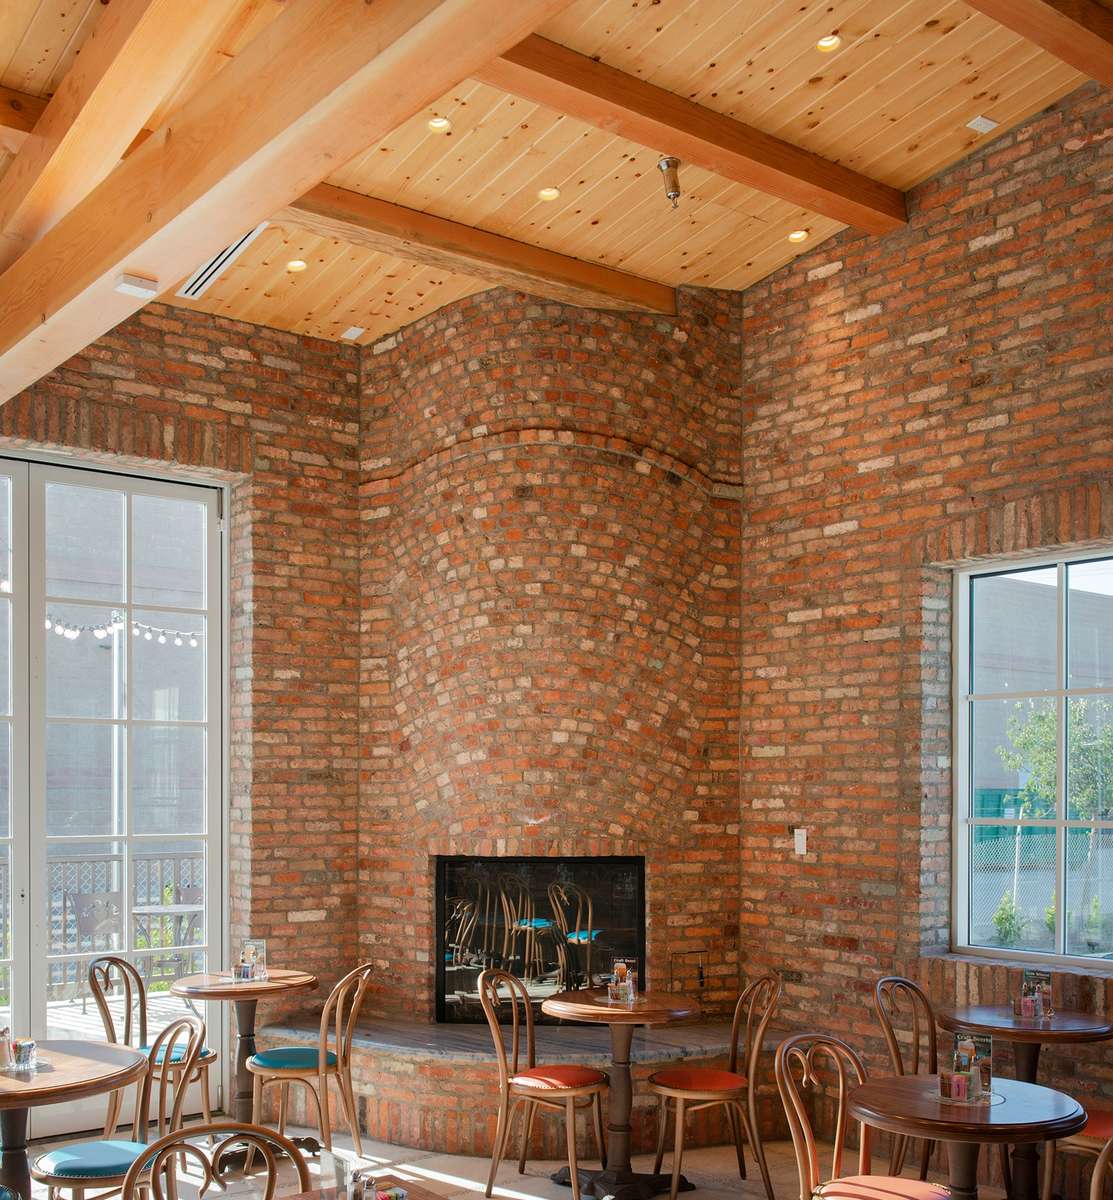 Rounded fireplace of reclaimed brick in corner of room with high ceilings and large windows.